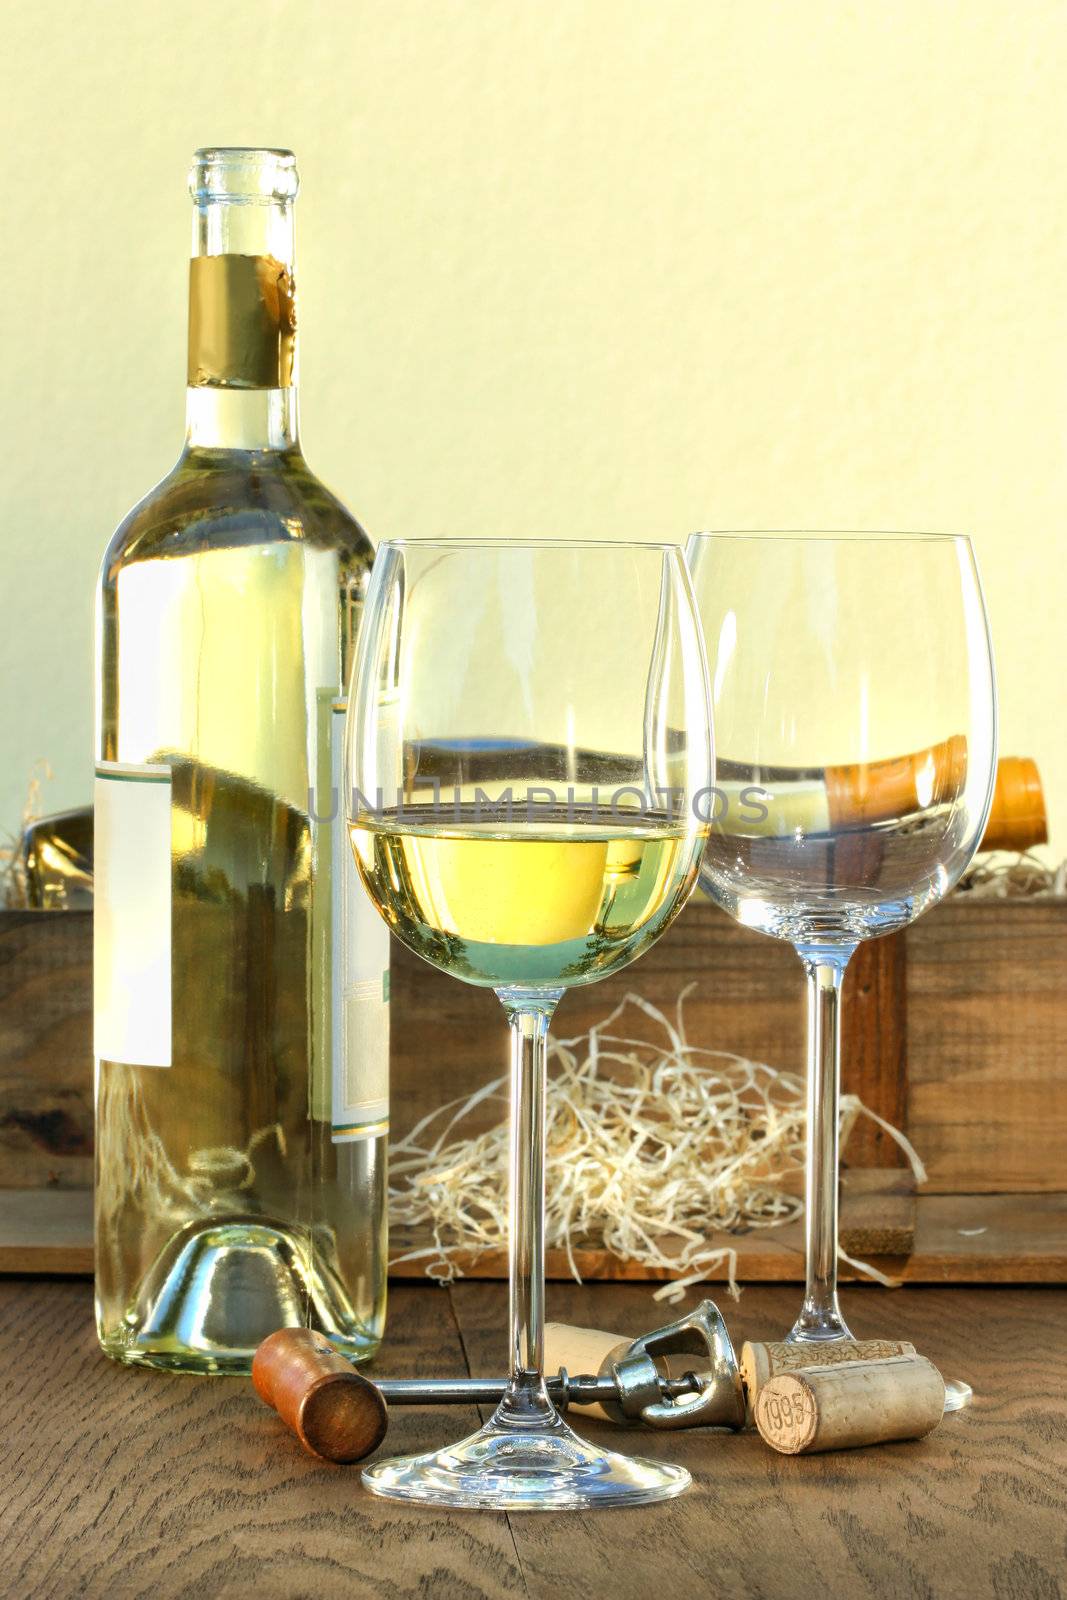 Still life of white wine bottle and glasses with crate in background